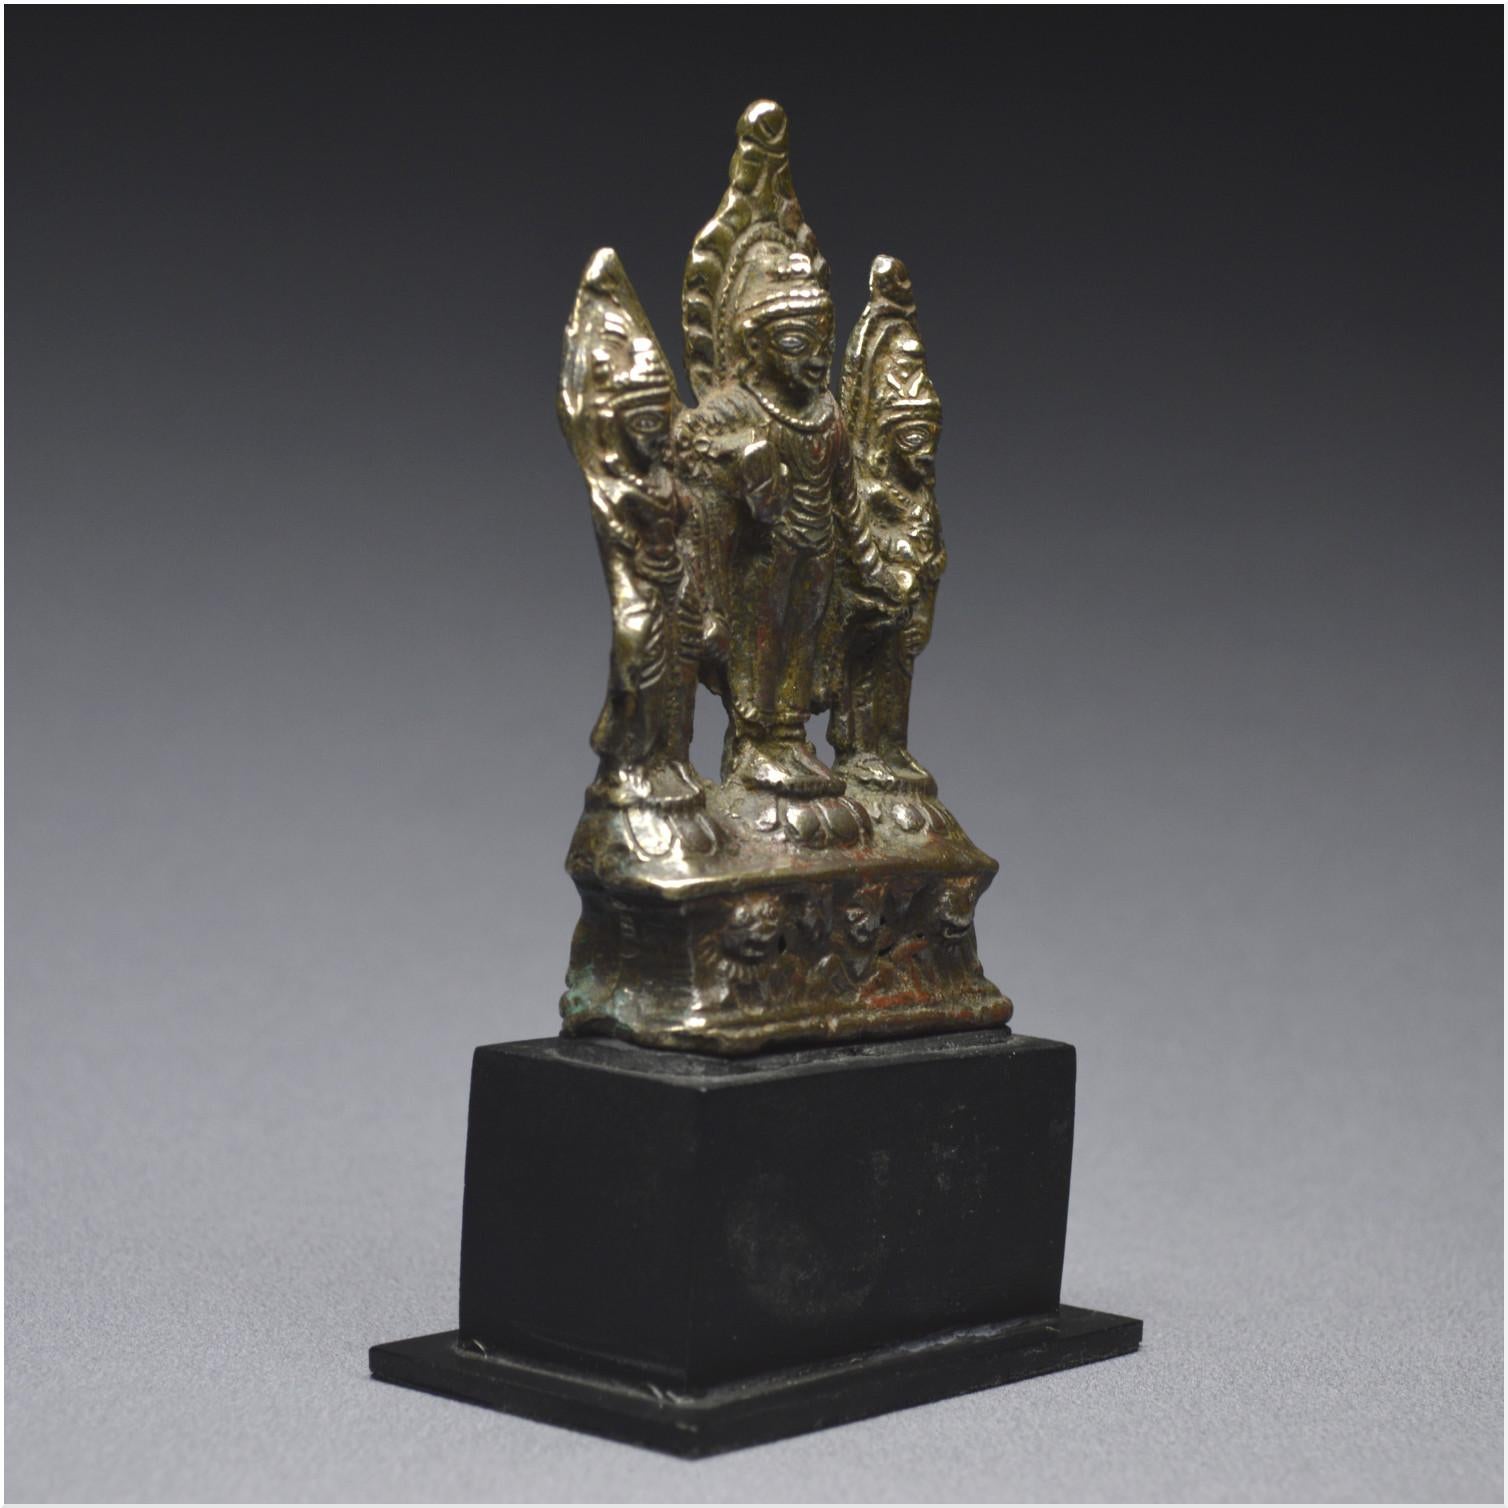 Western Tibet, Buddha accompanied by two bodhisattvas

Tibet Medieval Period
10th-12th century

The Buddha and the bodhisattvas are represented standing in light tribbanga (triple flexion), leaning against a double mandorla and positioned on